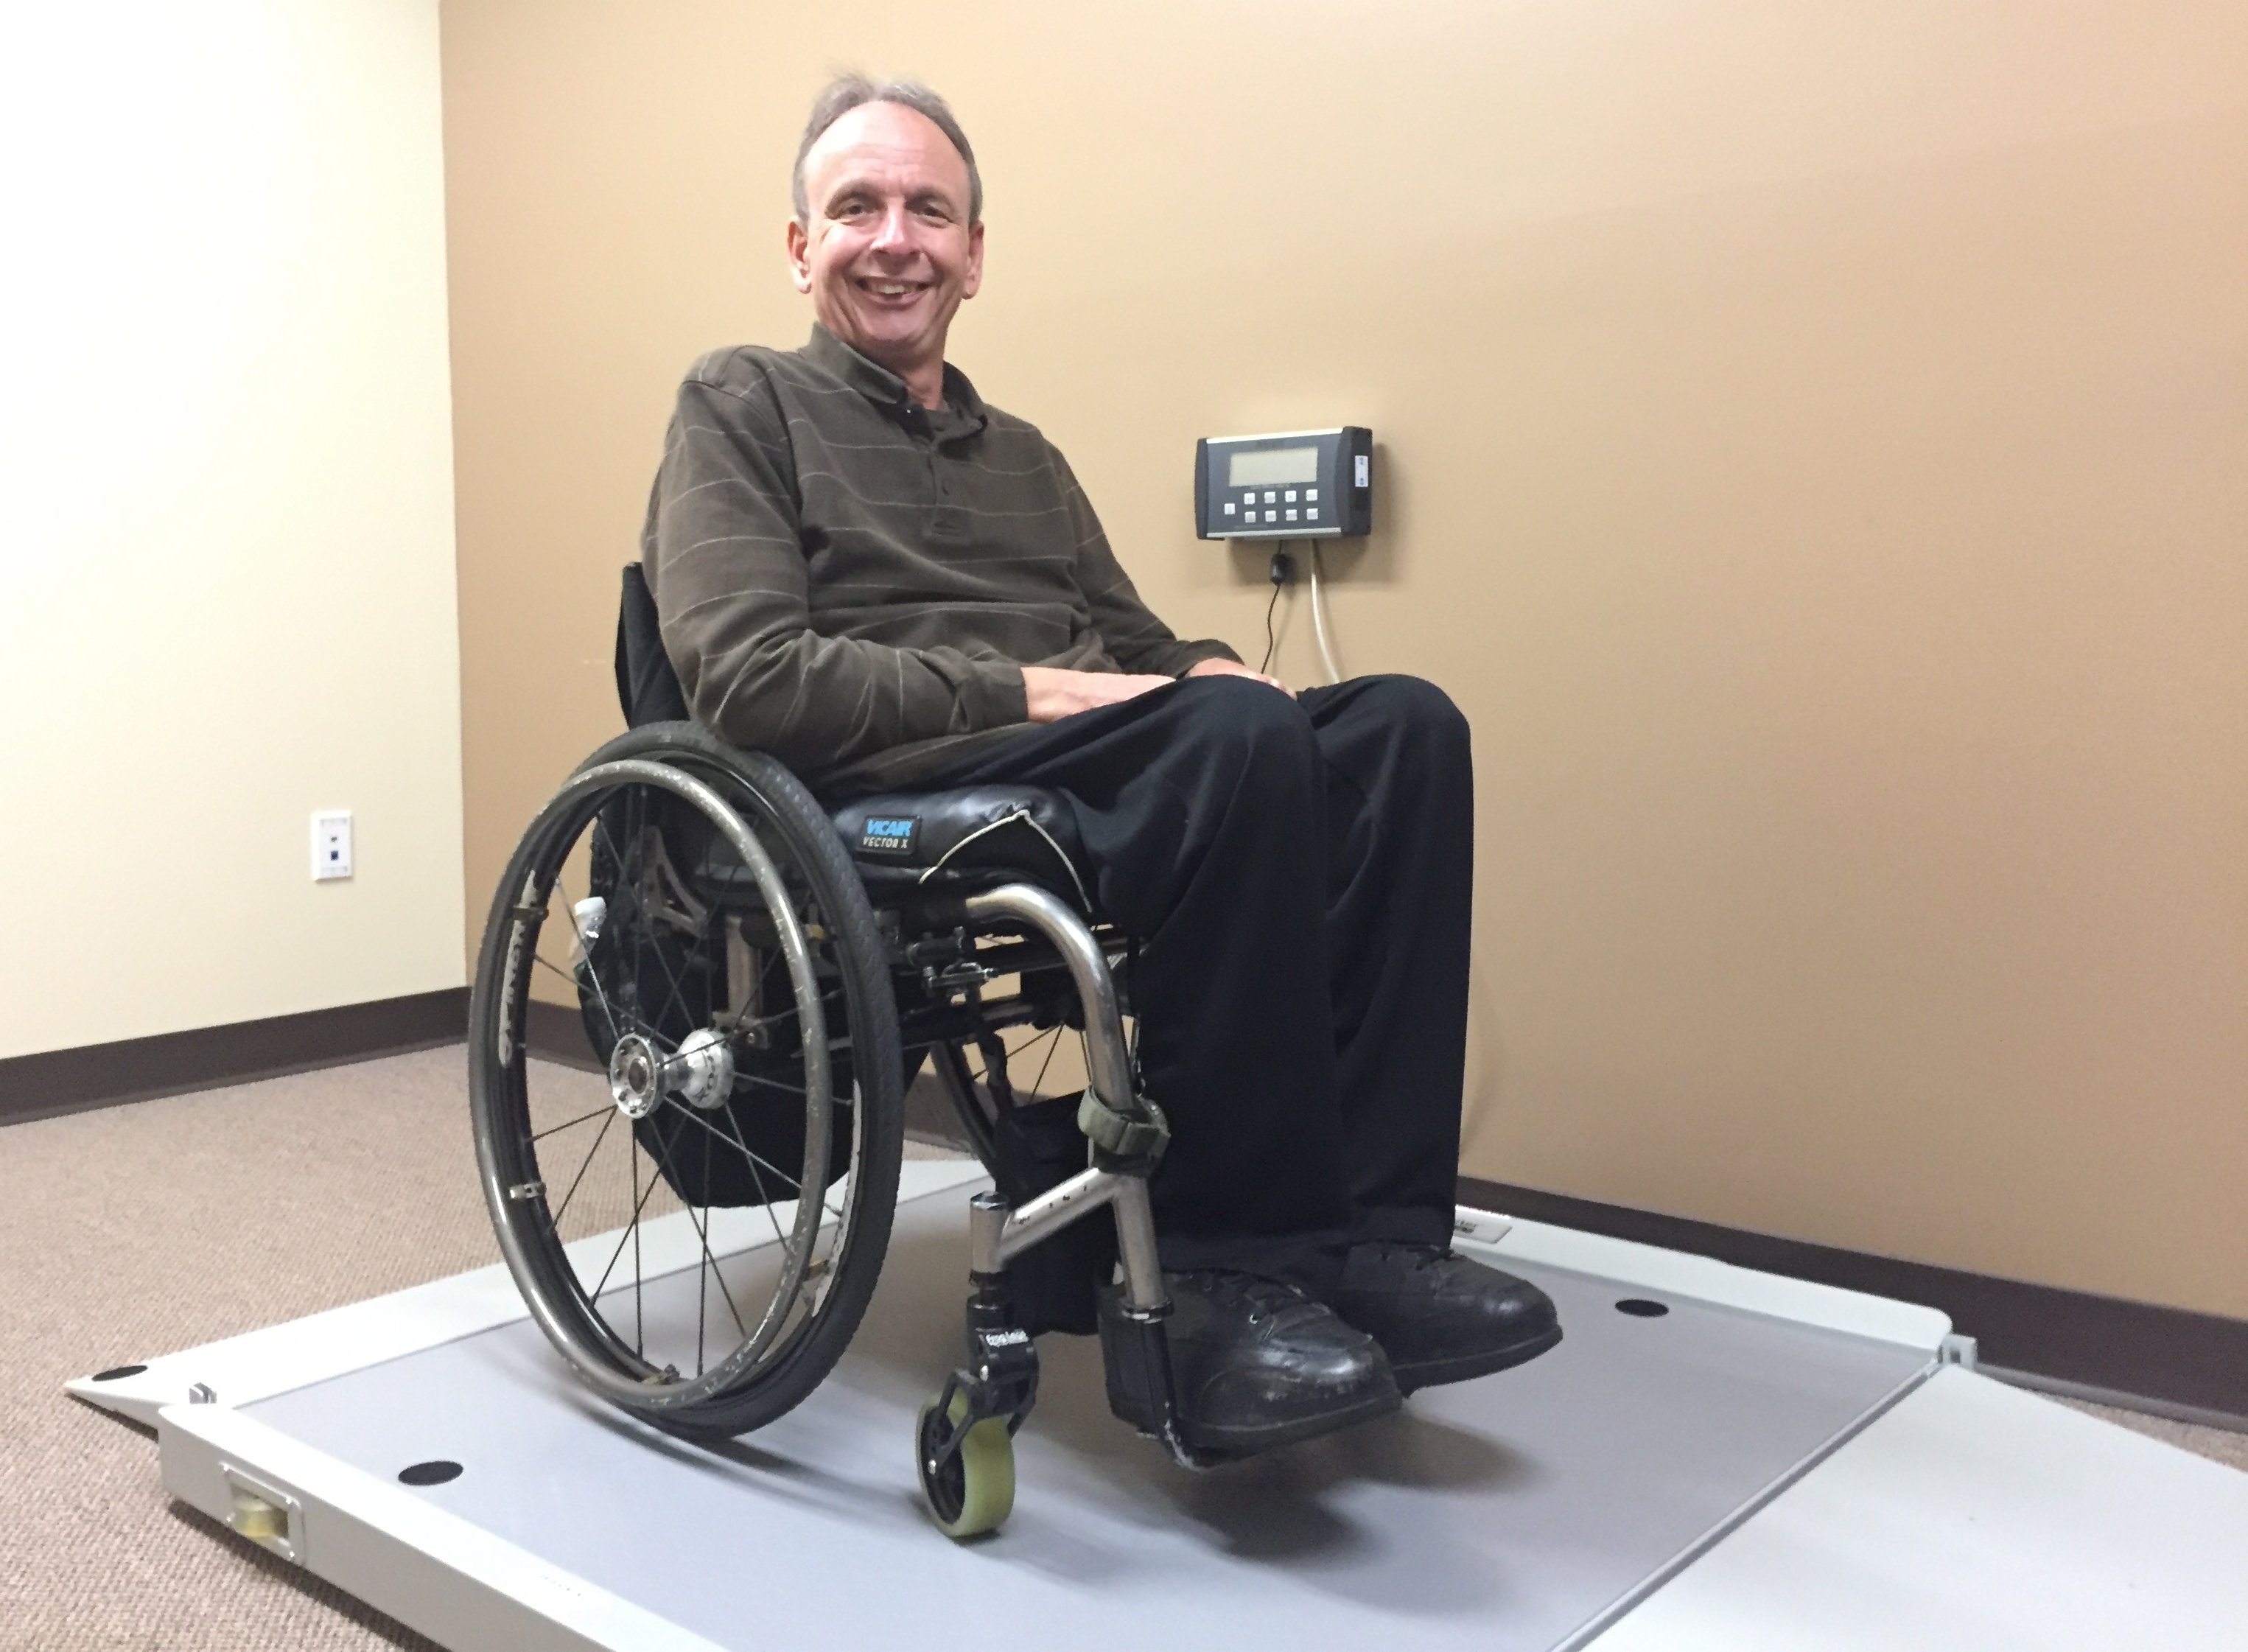 Smiling man in manual wheelchair on a roll-on scale in a small room.